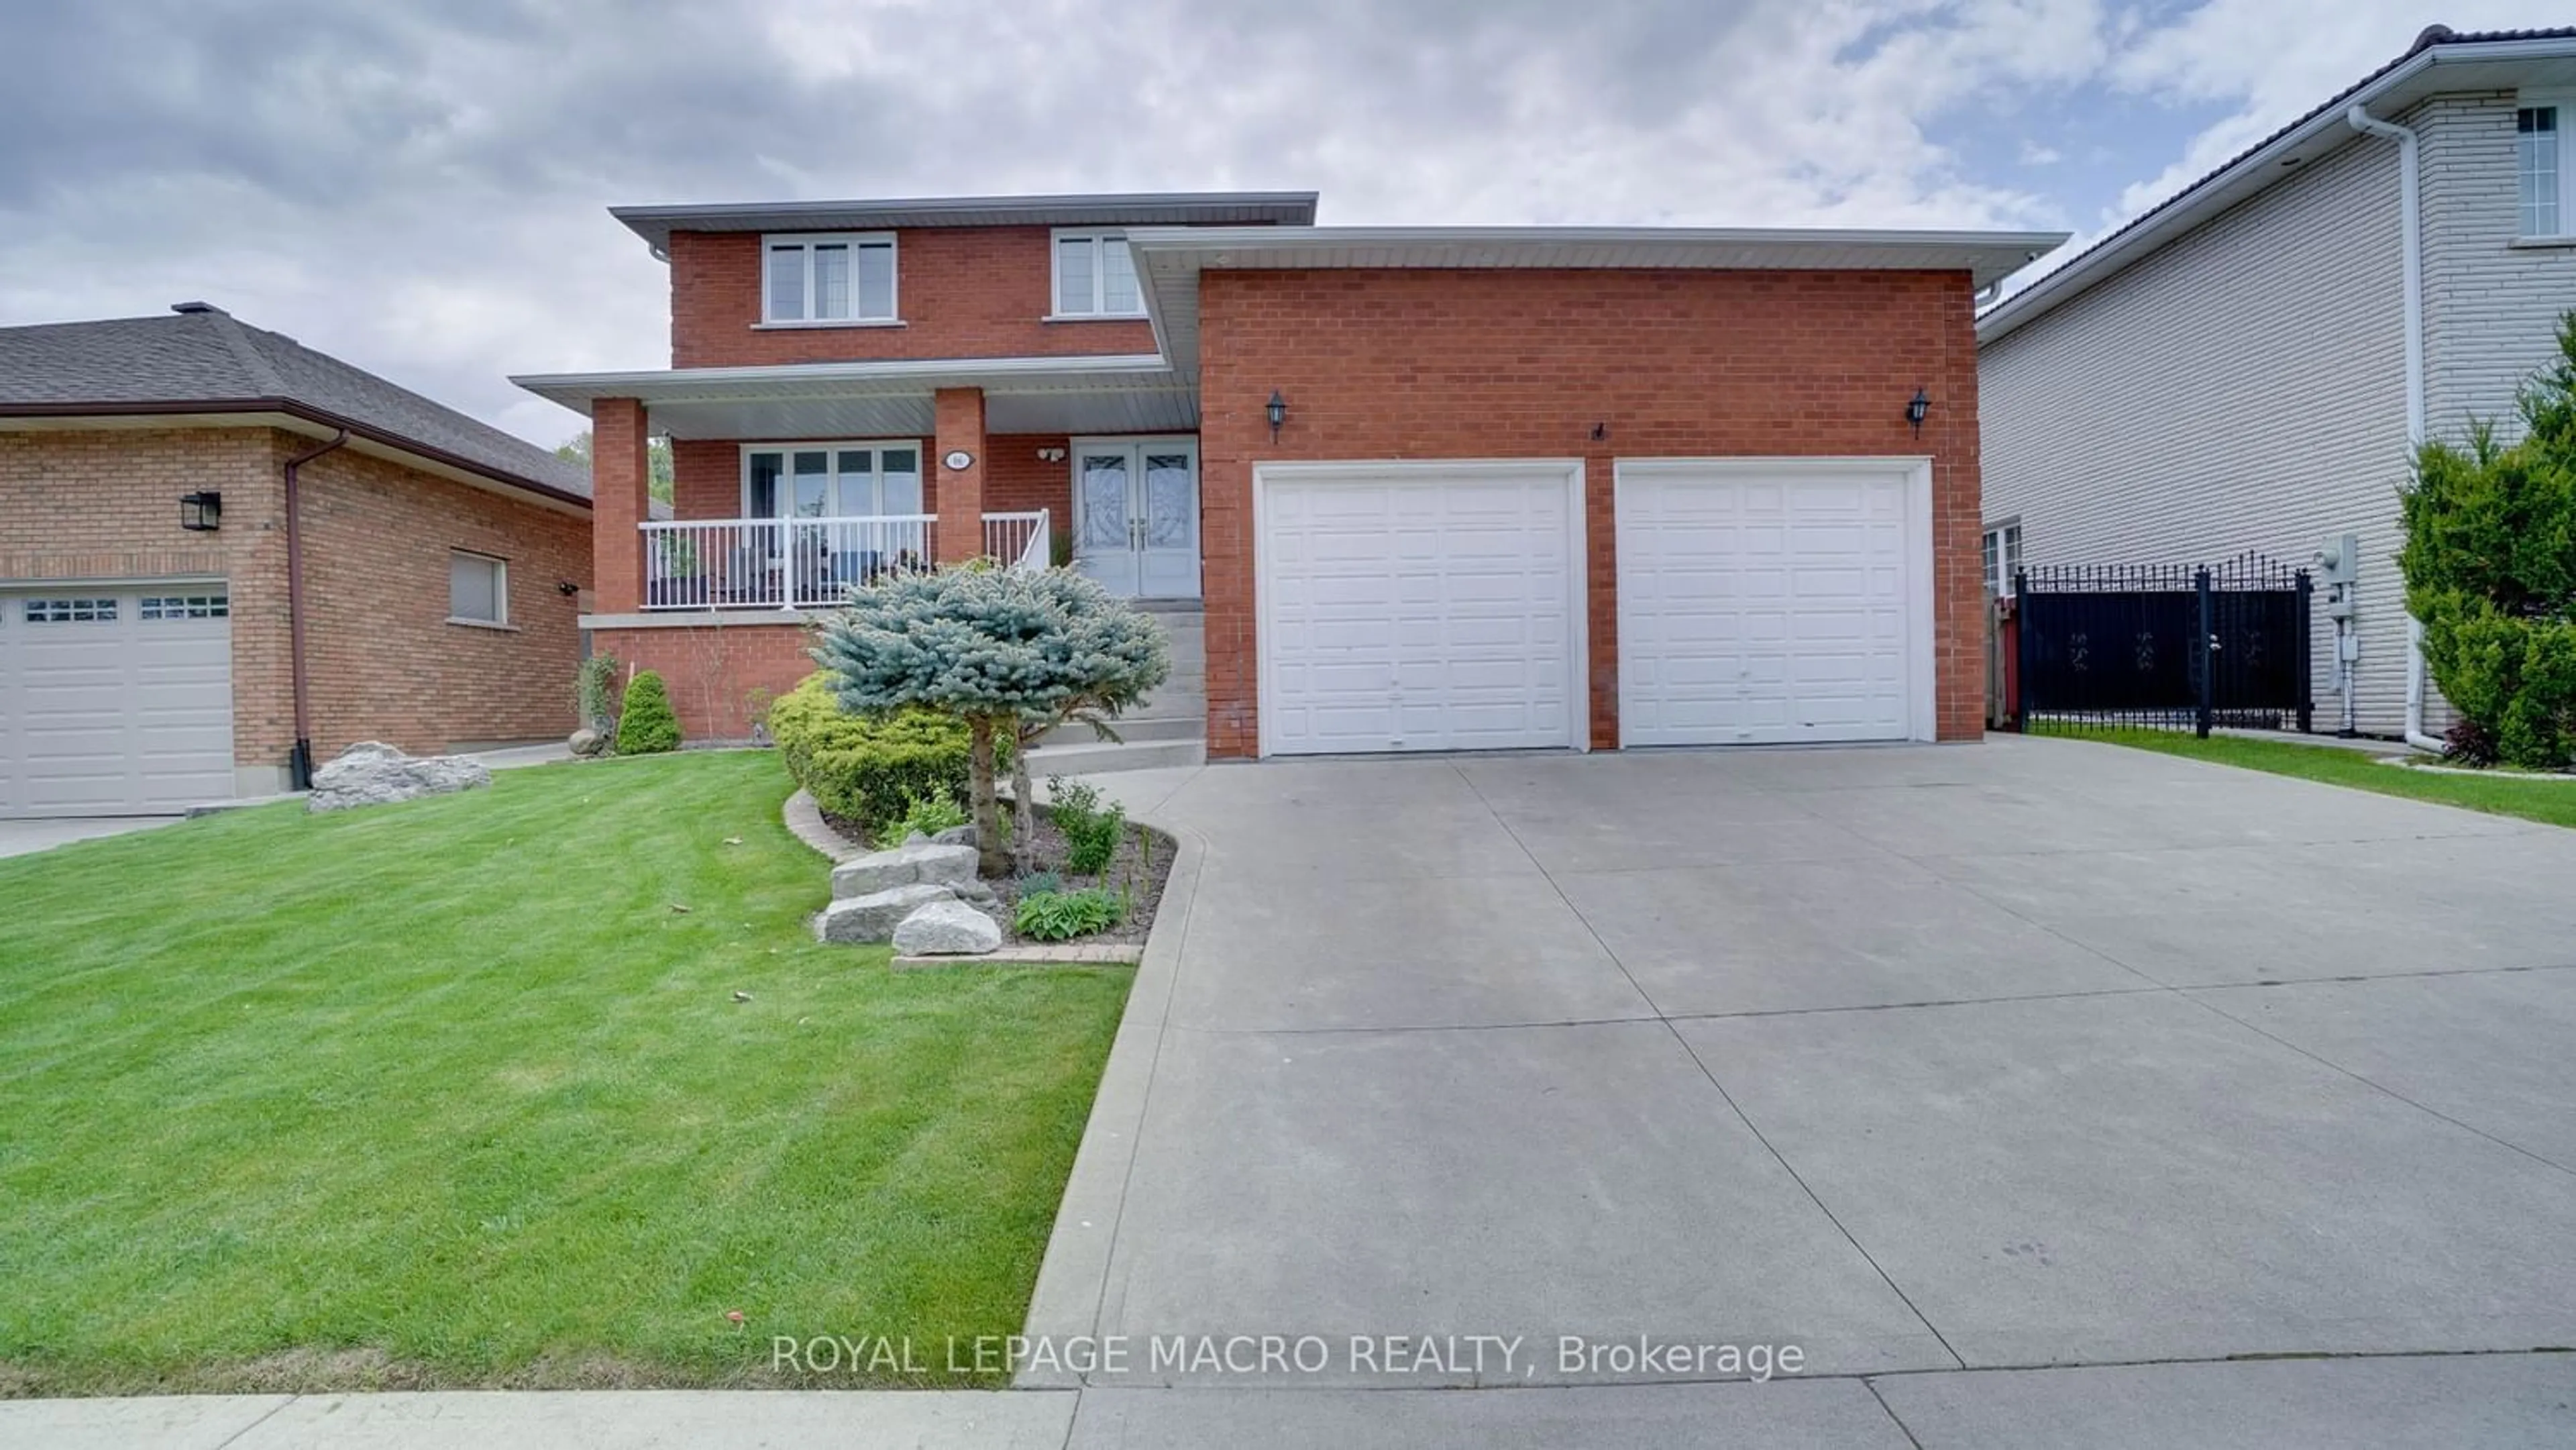 Frontside or backside of a home for 66 Glen Cannon Dr, Hamilton Ontario L8G 4E1